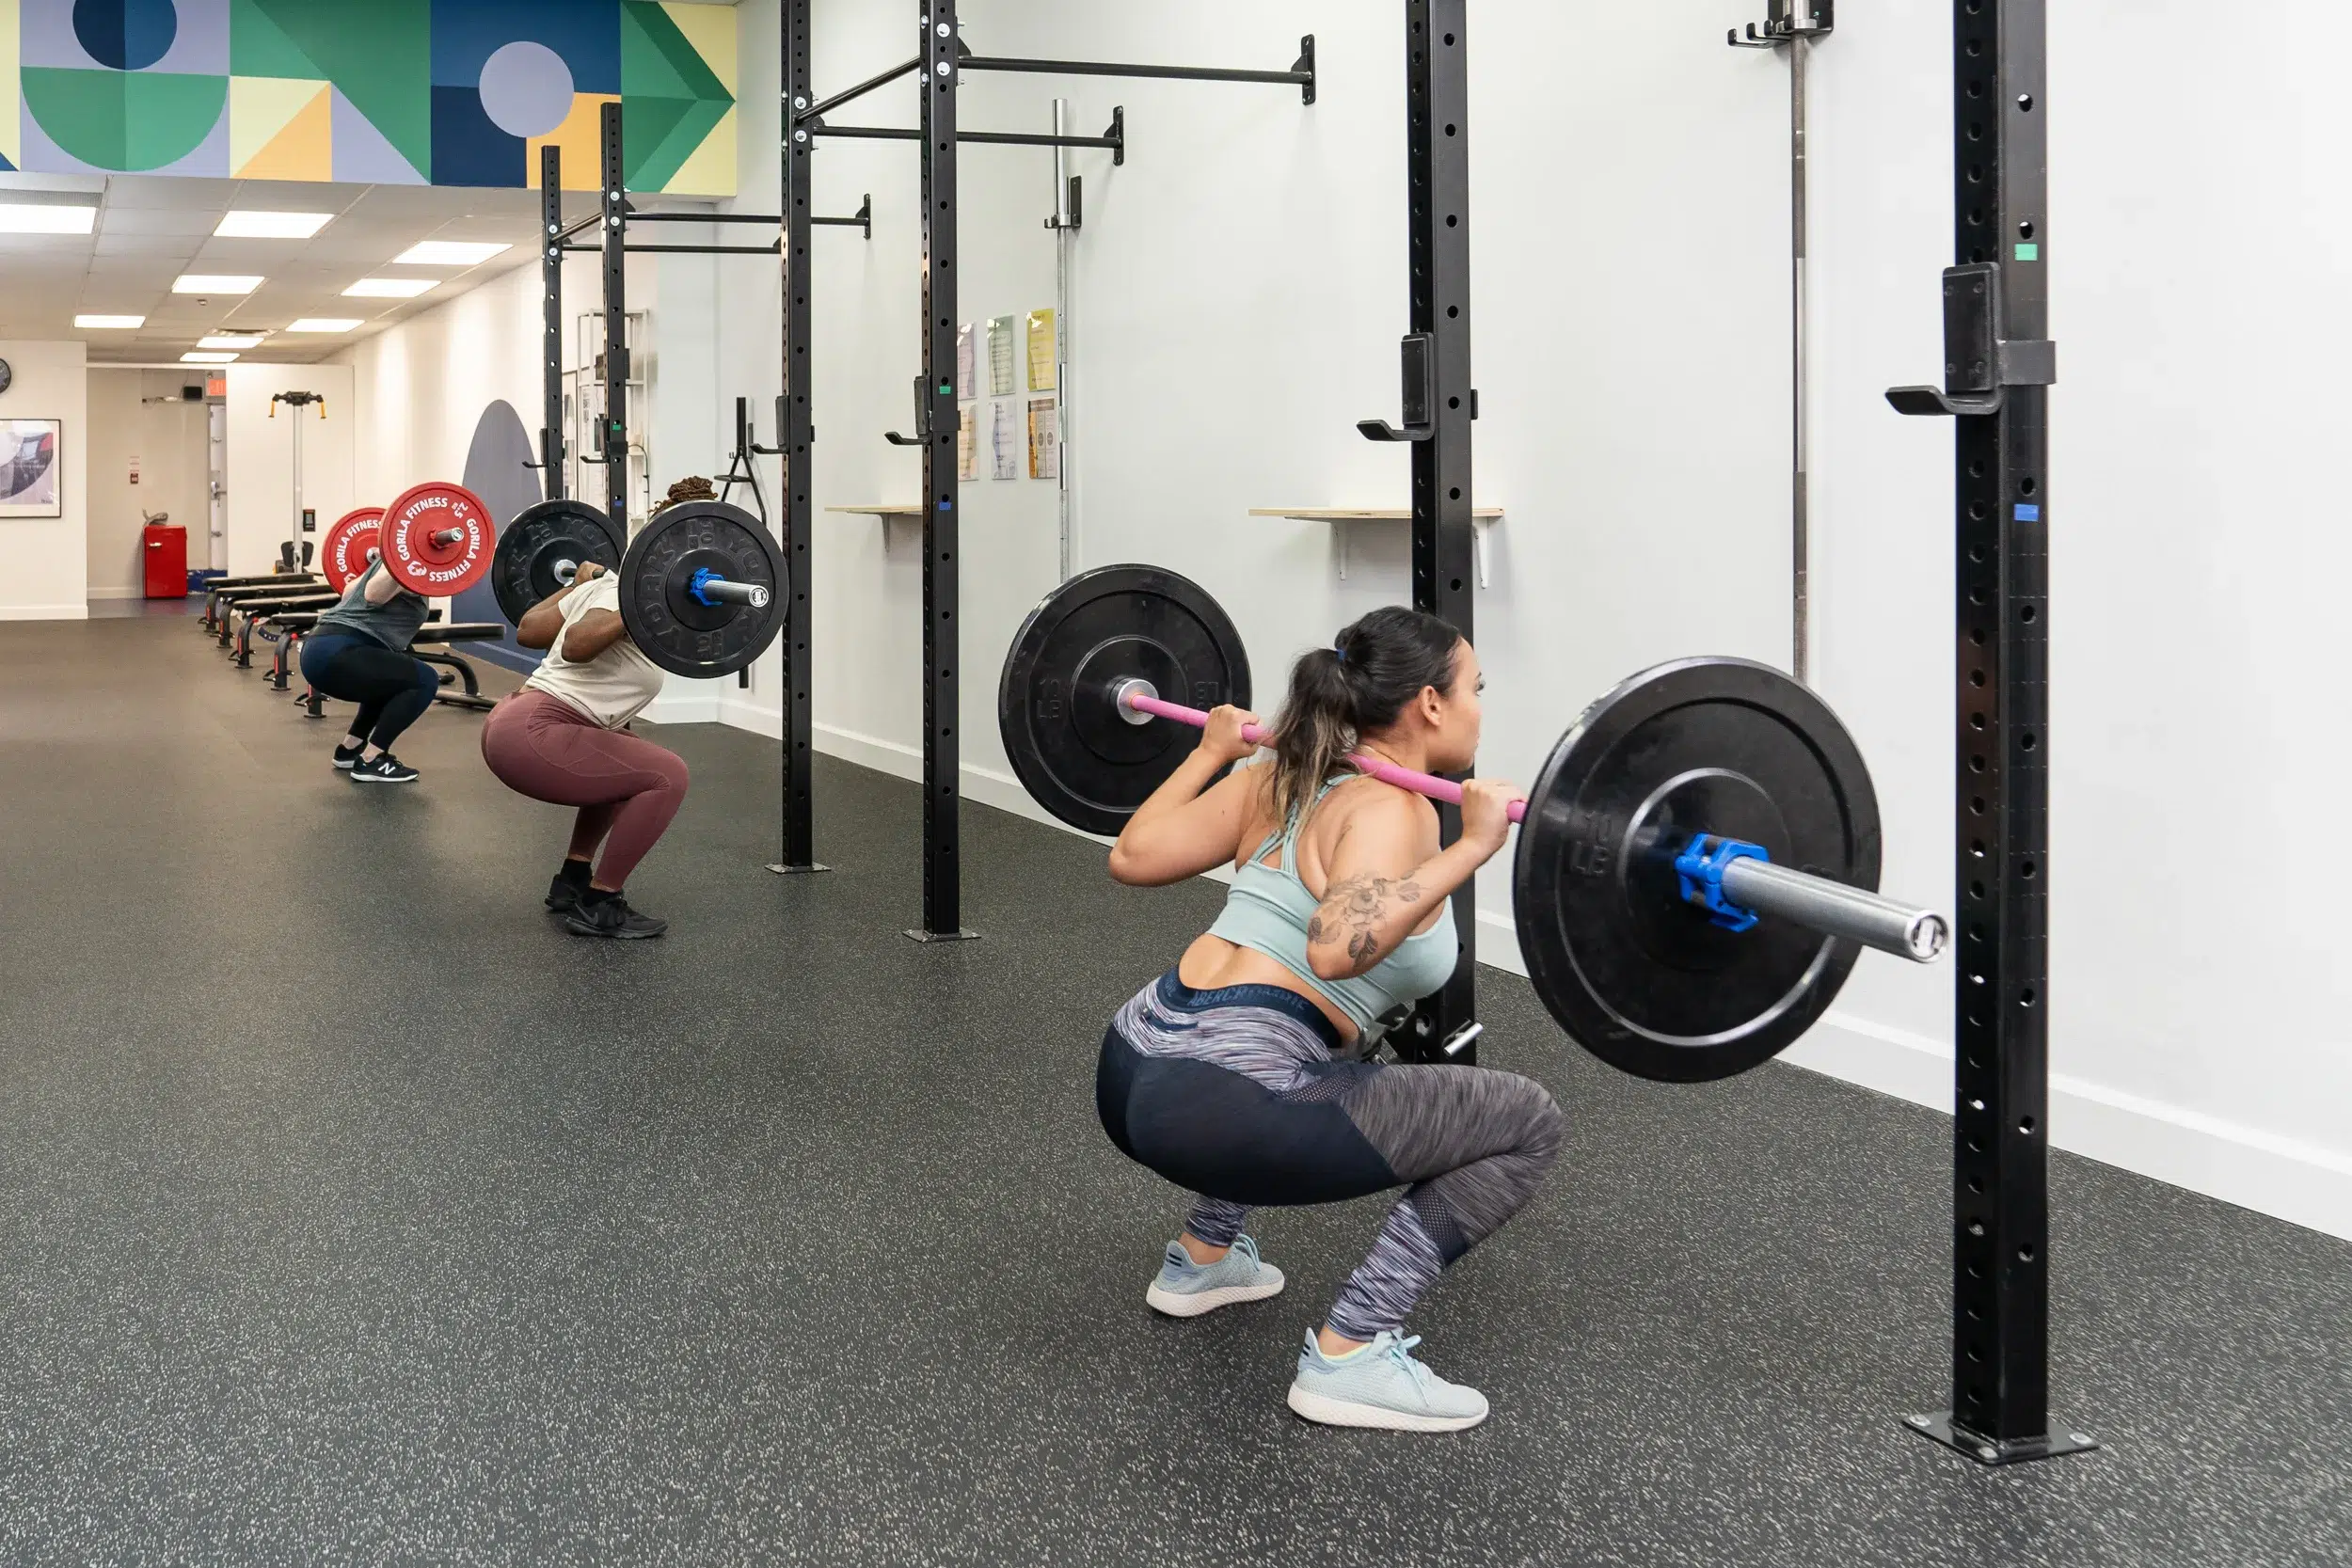 Three people doing a barbell squat exercise in a group fitness class.